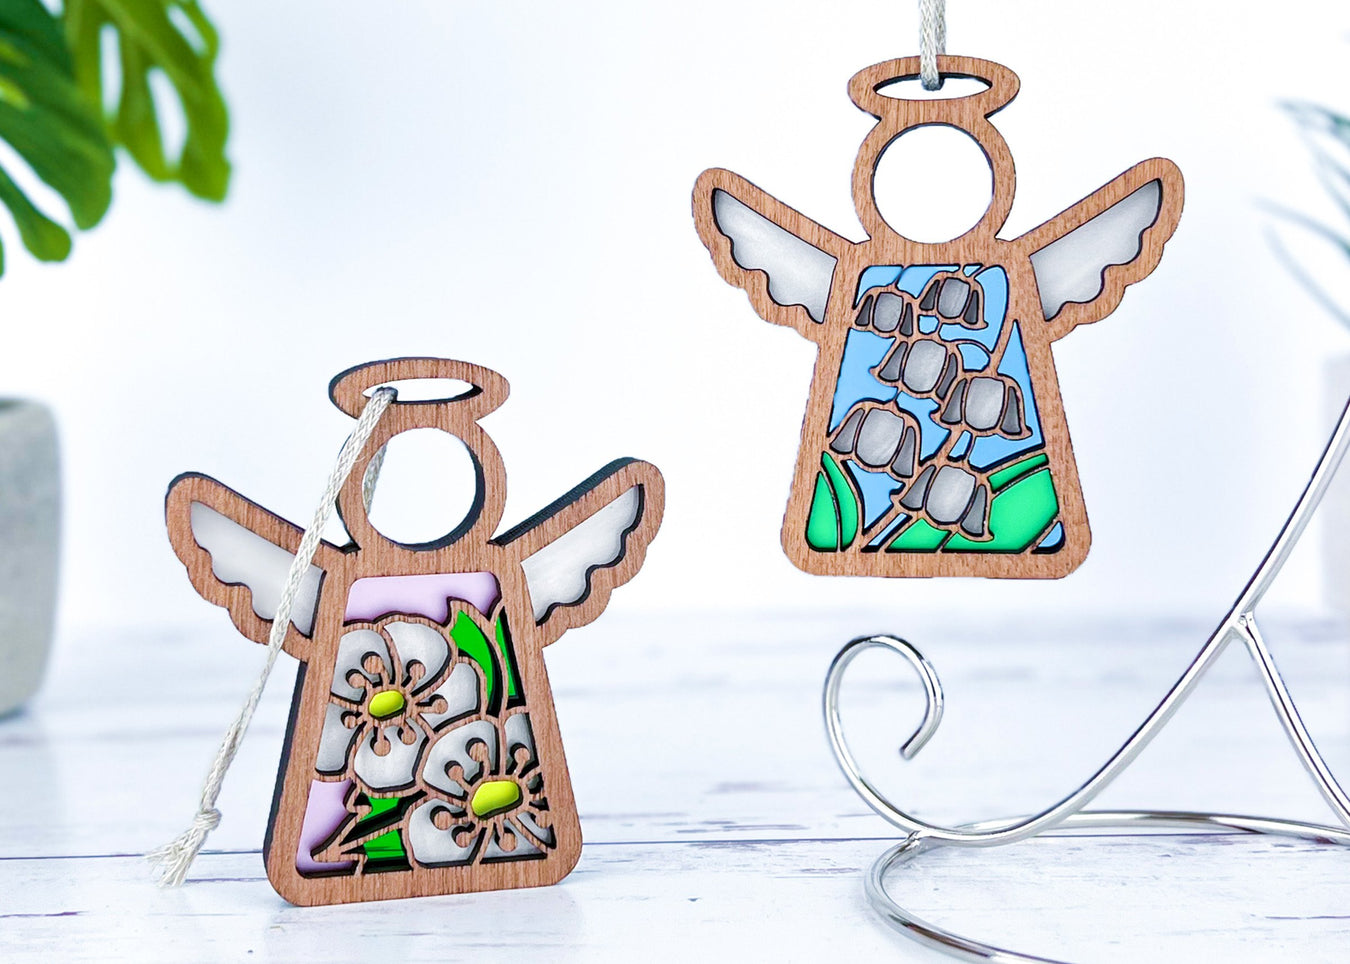 Angel ornaments featuring May birth month flowers, ideal birthday gift ideas for a wife, best friend or special women, showcasing vibrant hawthorn and lily of the valley birth flowers in a stained glass inspired style.